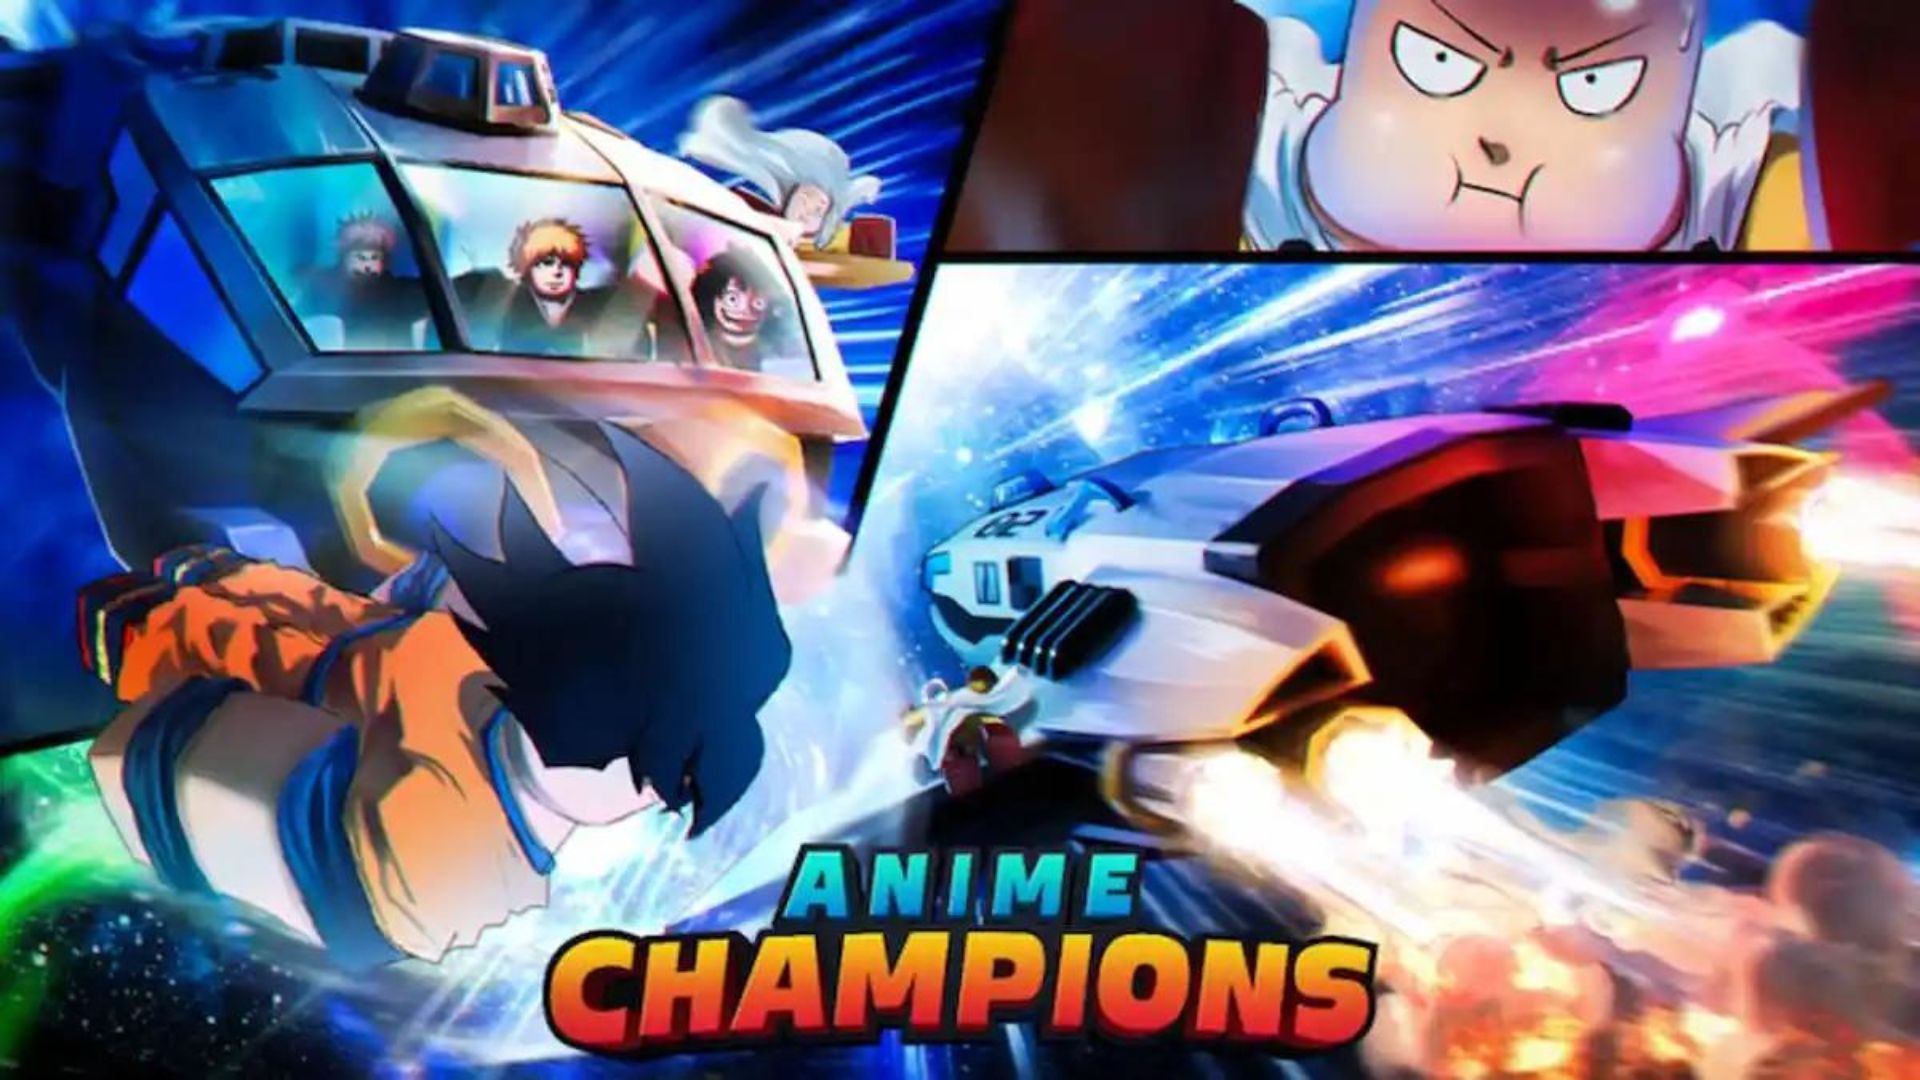 How To Use The Devourer Crystals in Anime Champions Simulator